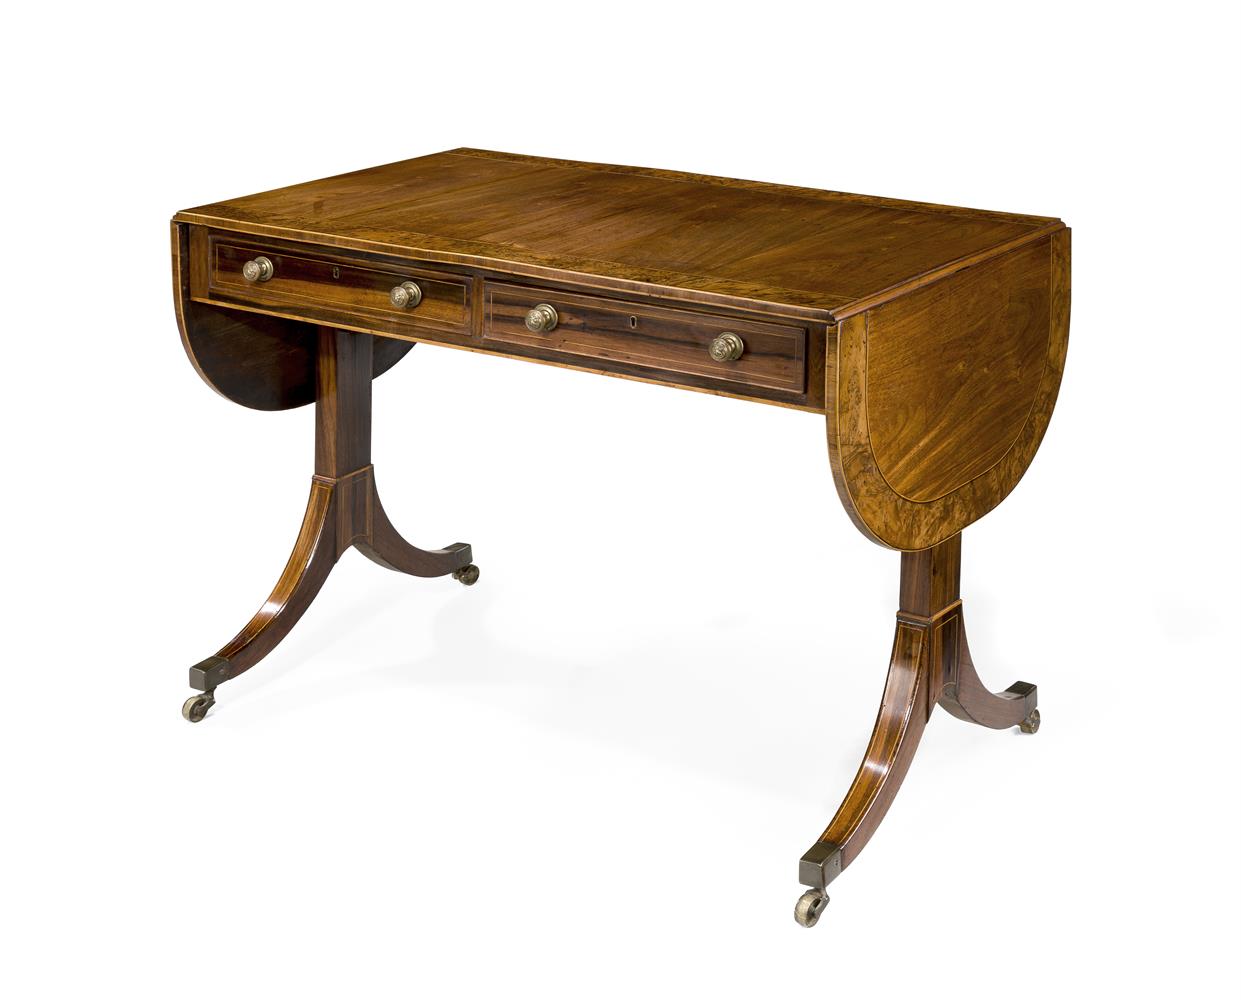 Y AN UNUSUAL REGENCY PADOUK AND BURR YEW CROSSBANDED SOFA TABLE, CIRCA 1815 - Image 2 of 3